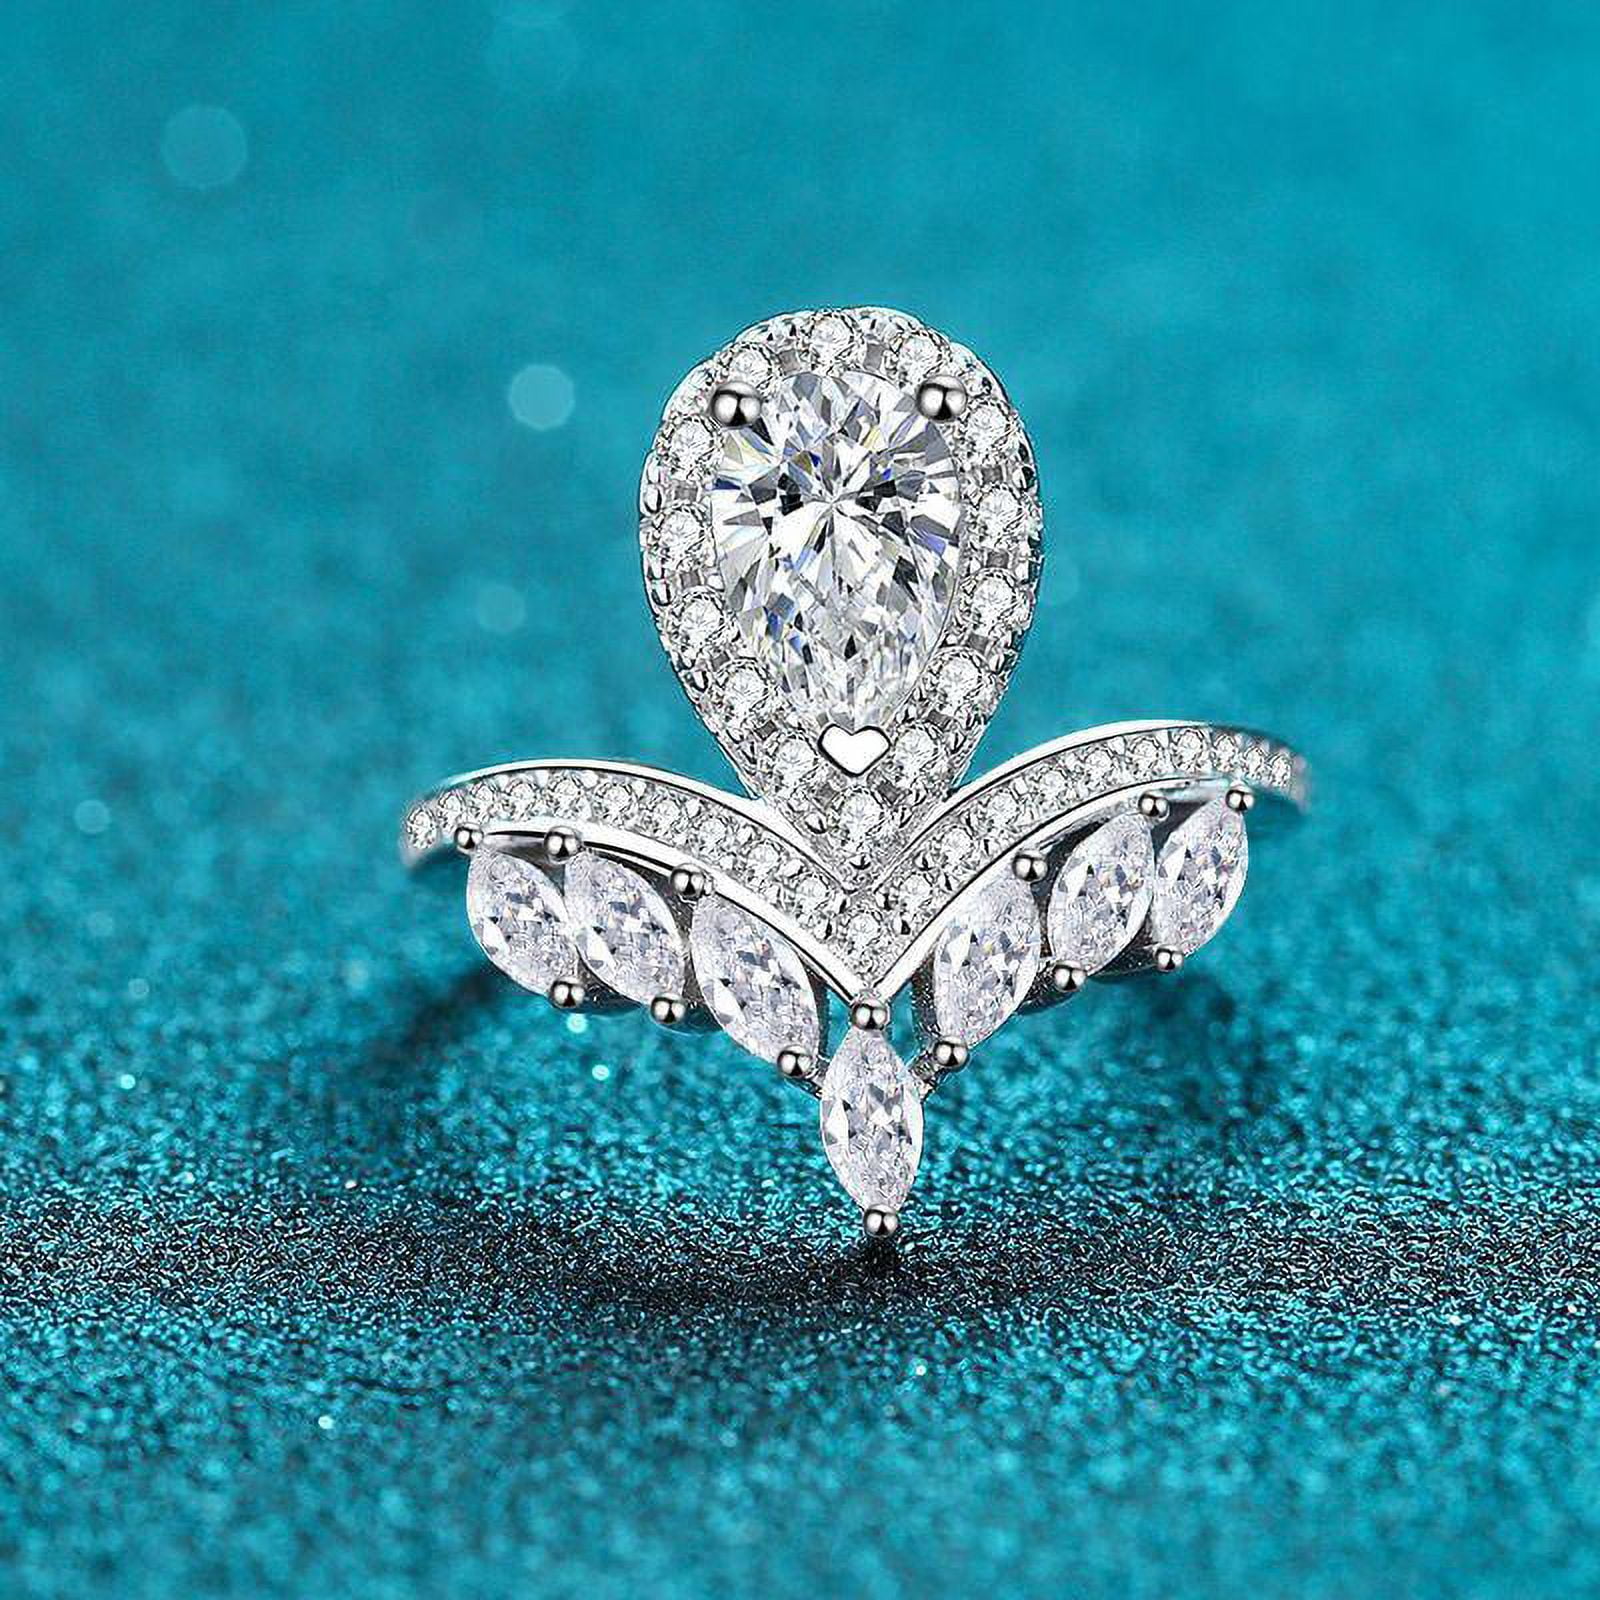 Engagement Ring Designs For Female